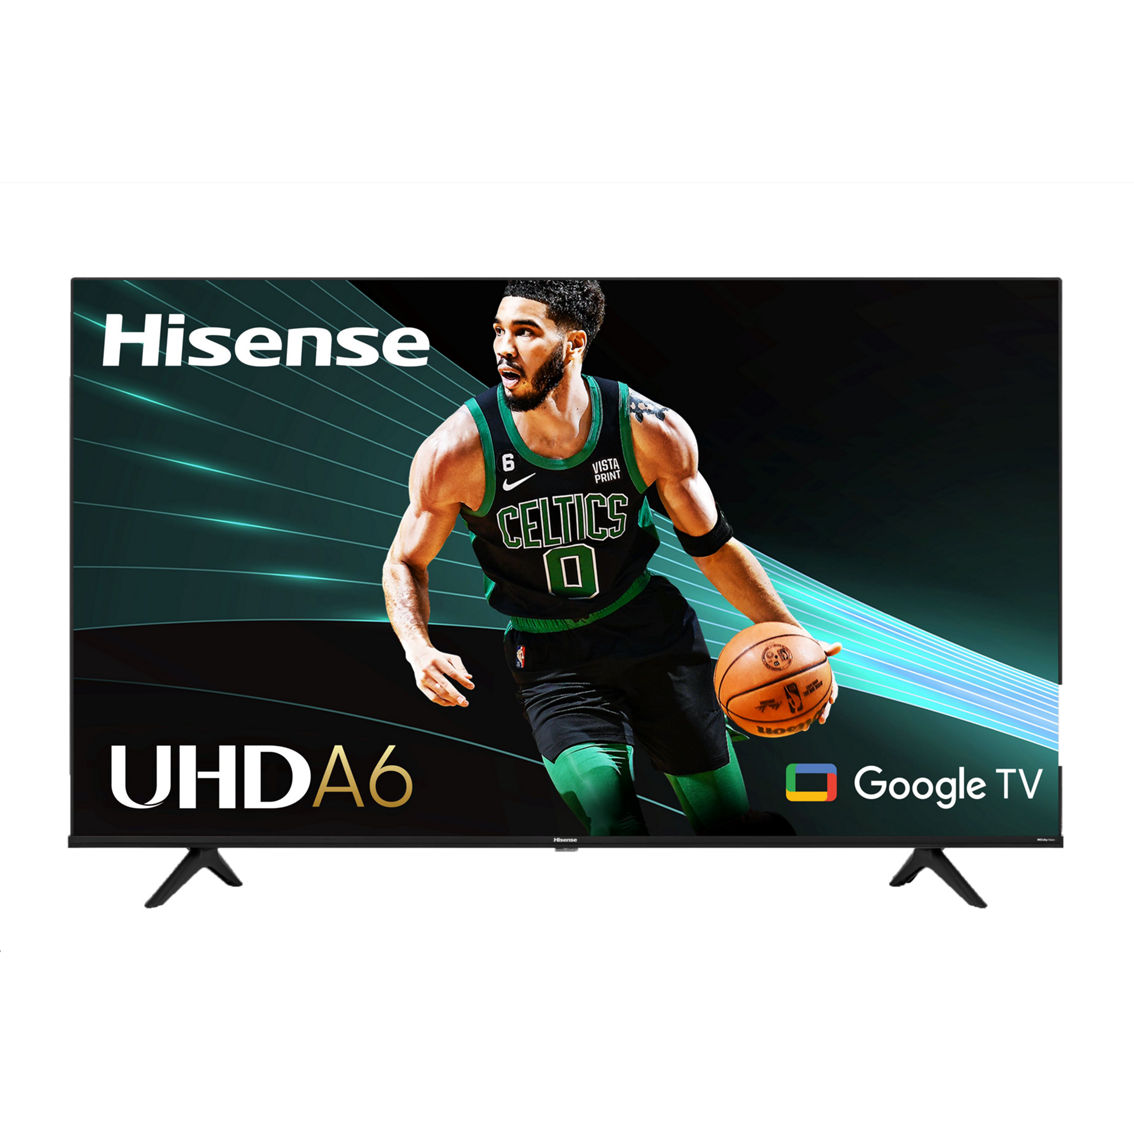 Hisense 55 in. 4K Ultra HD Google TV with Game Mode Plus and Google Assistant - Image 1 of 3